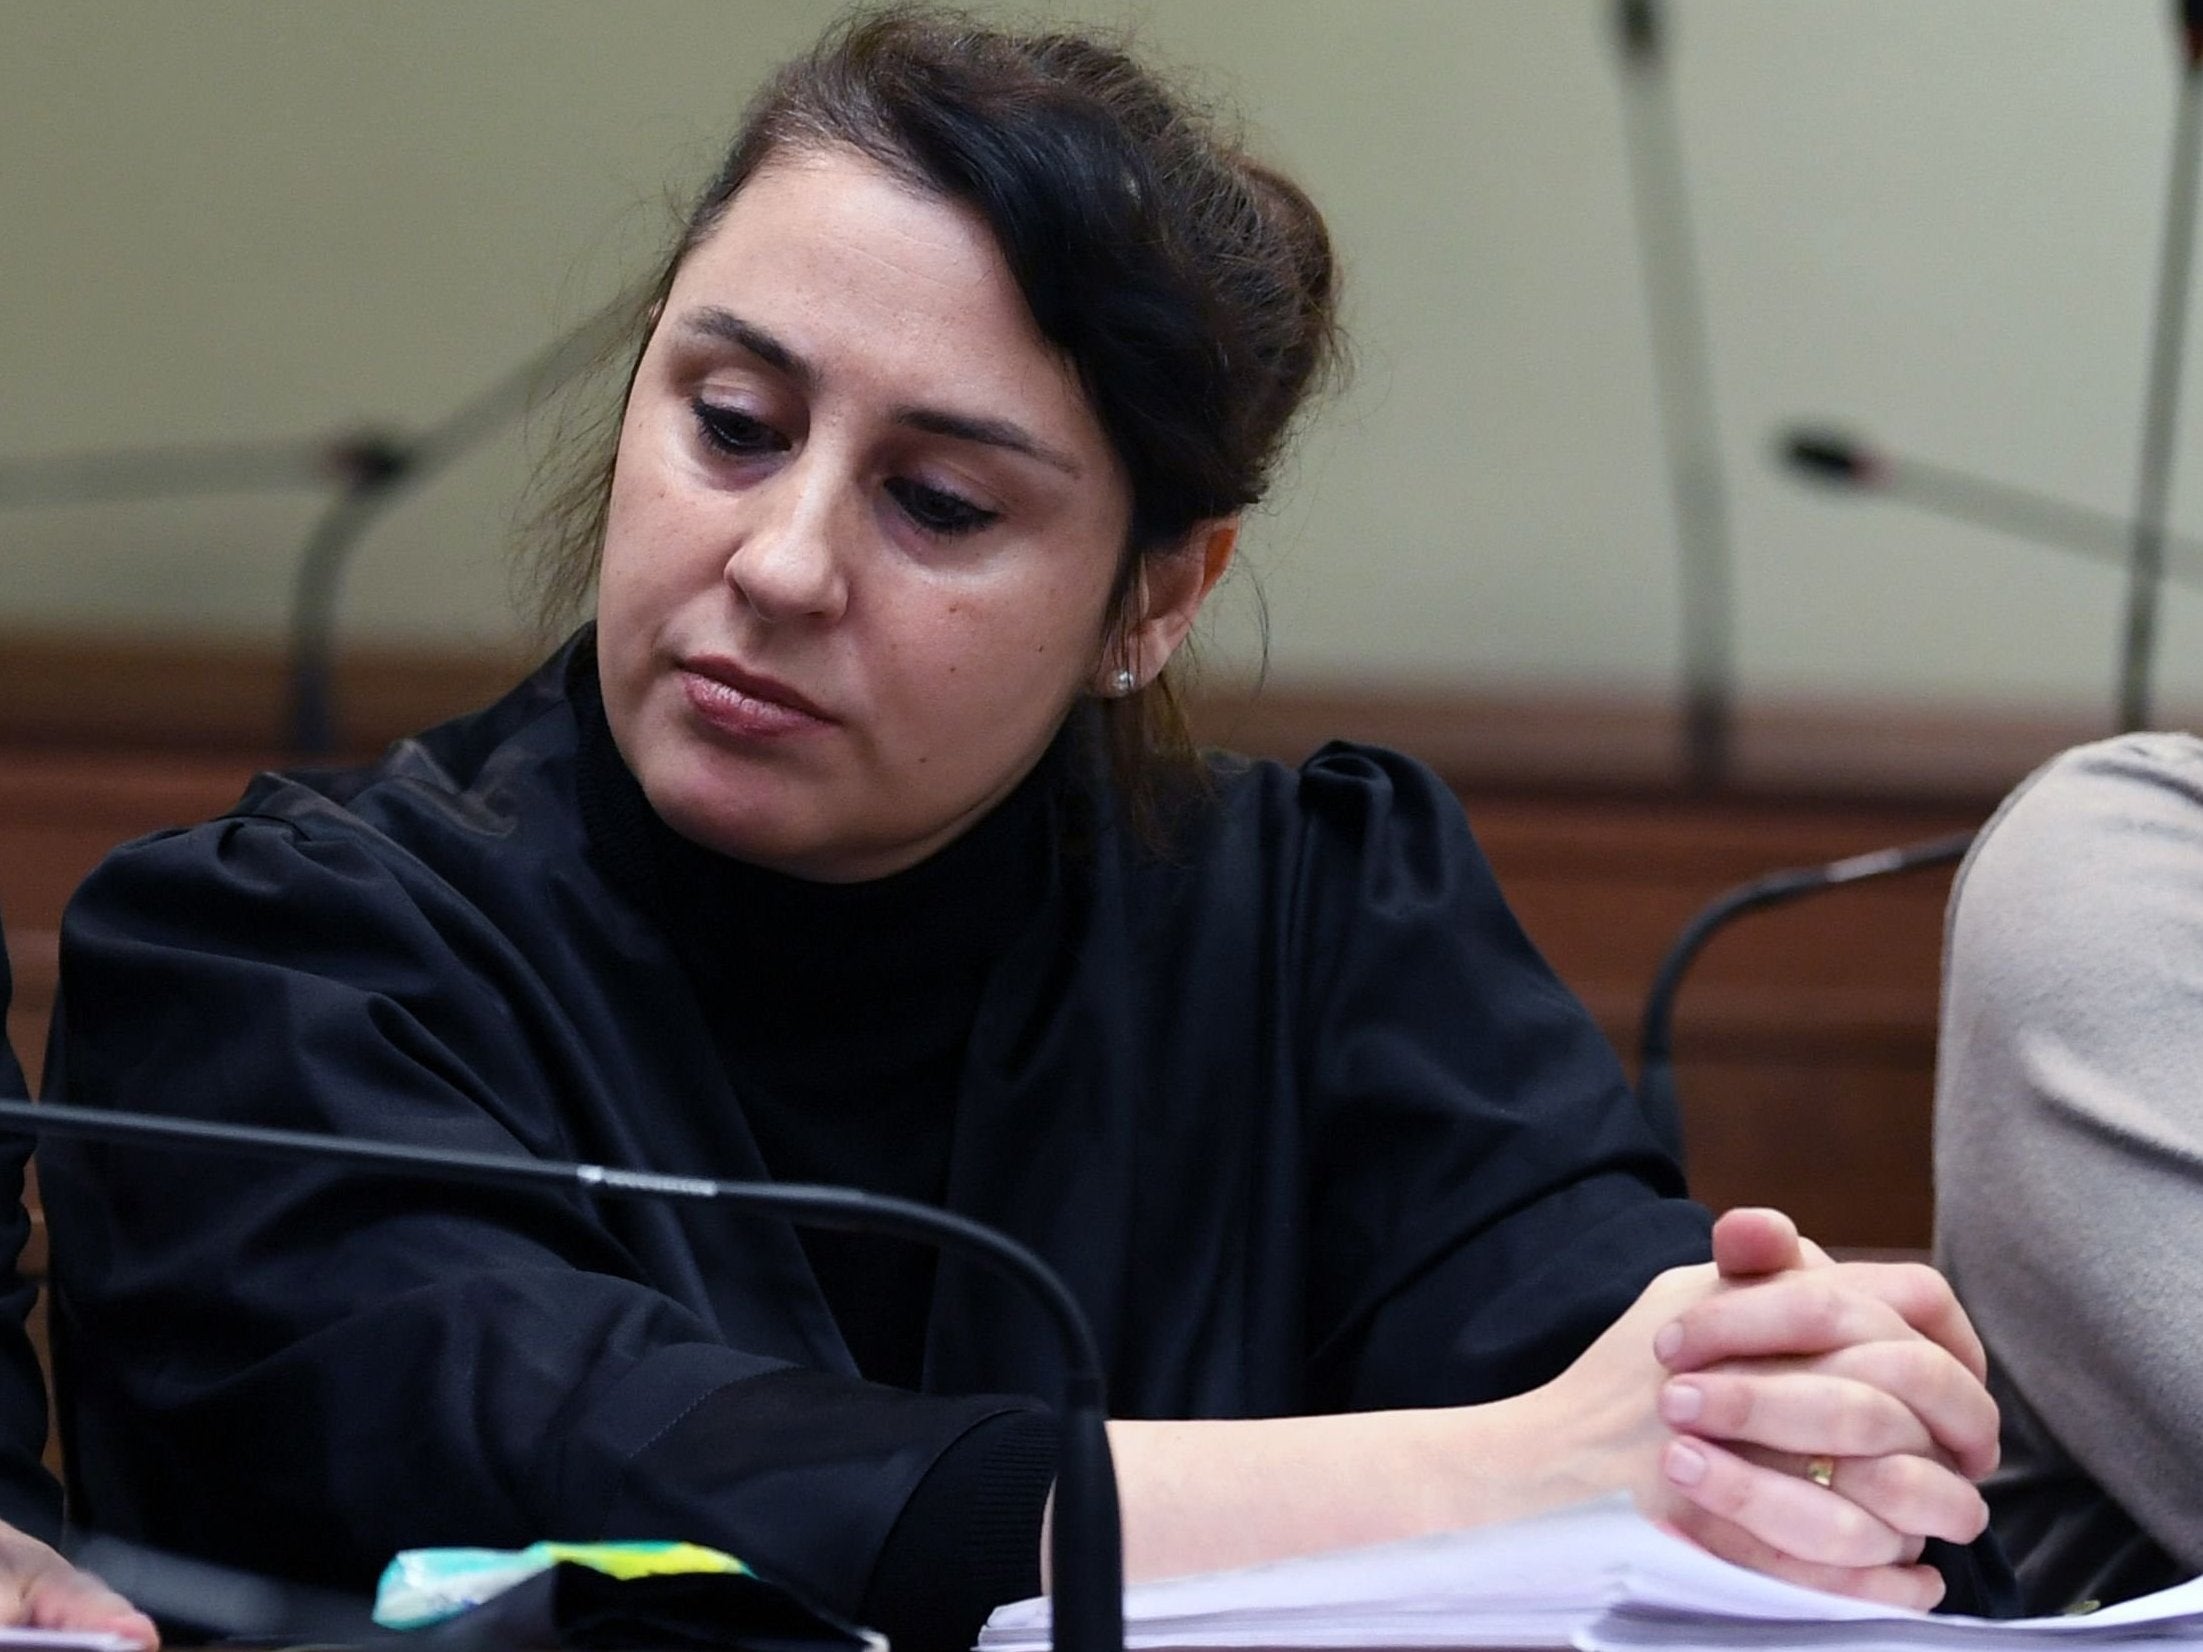 Lawyer Seda Basay-Yildiz says she has received as many as 50 threats or insults per day because of her work